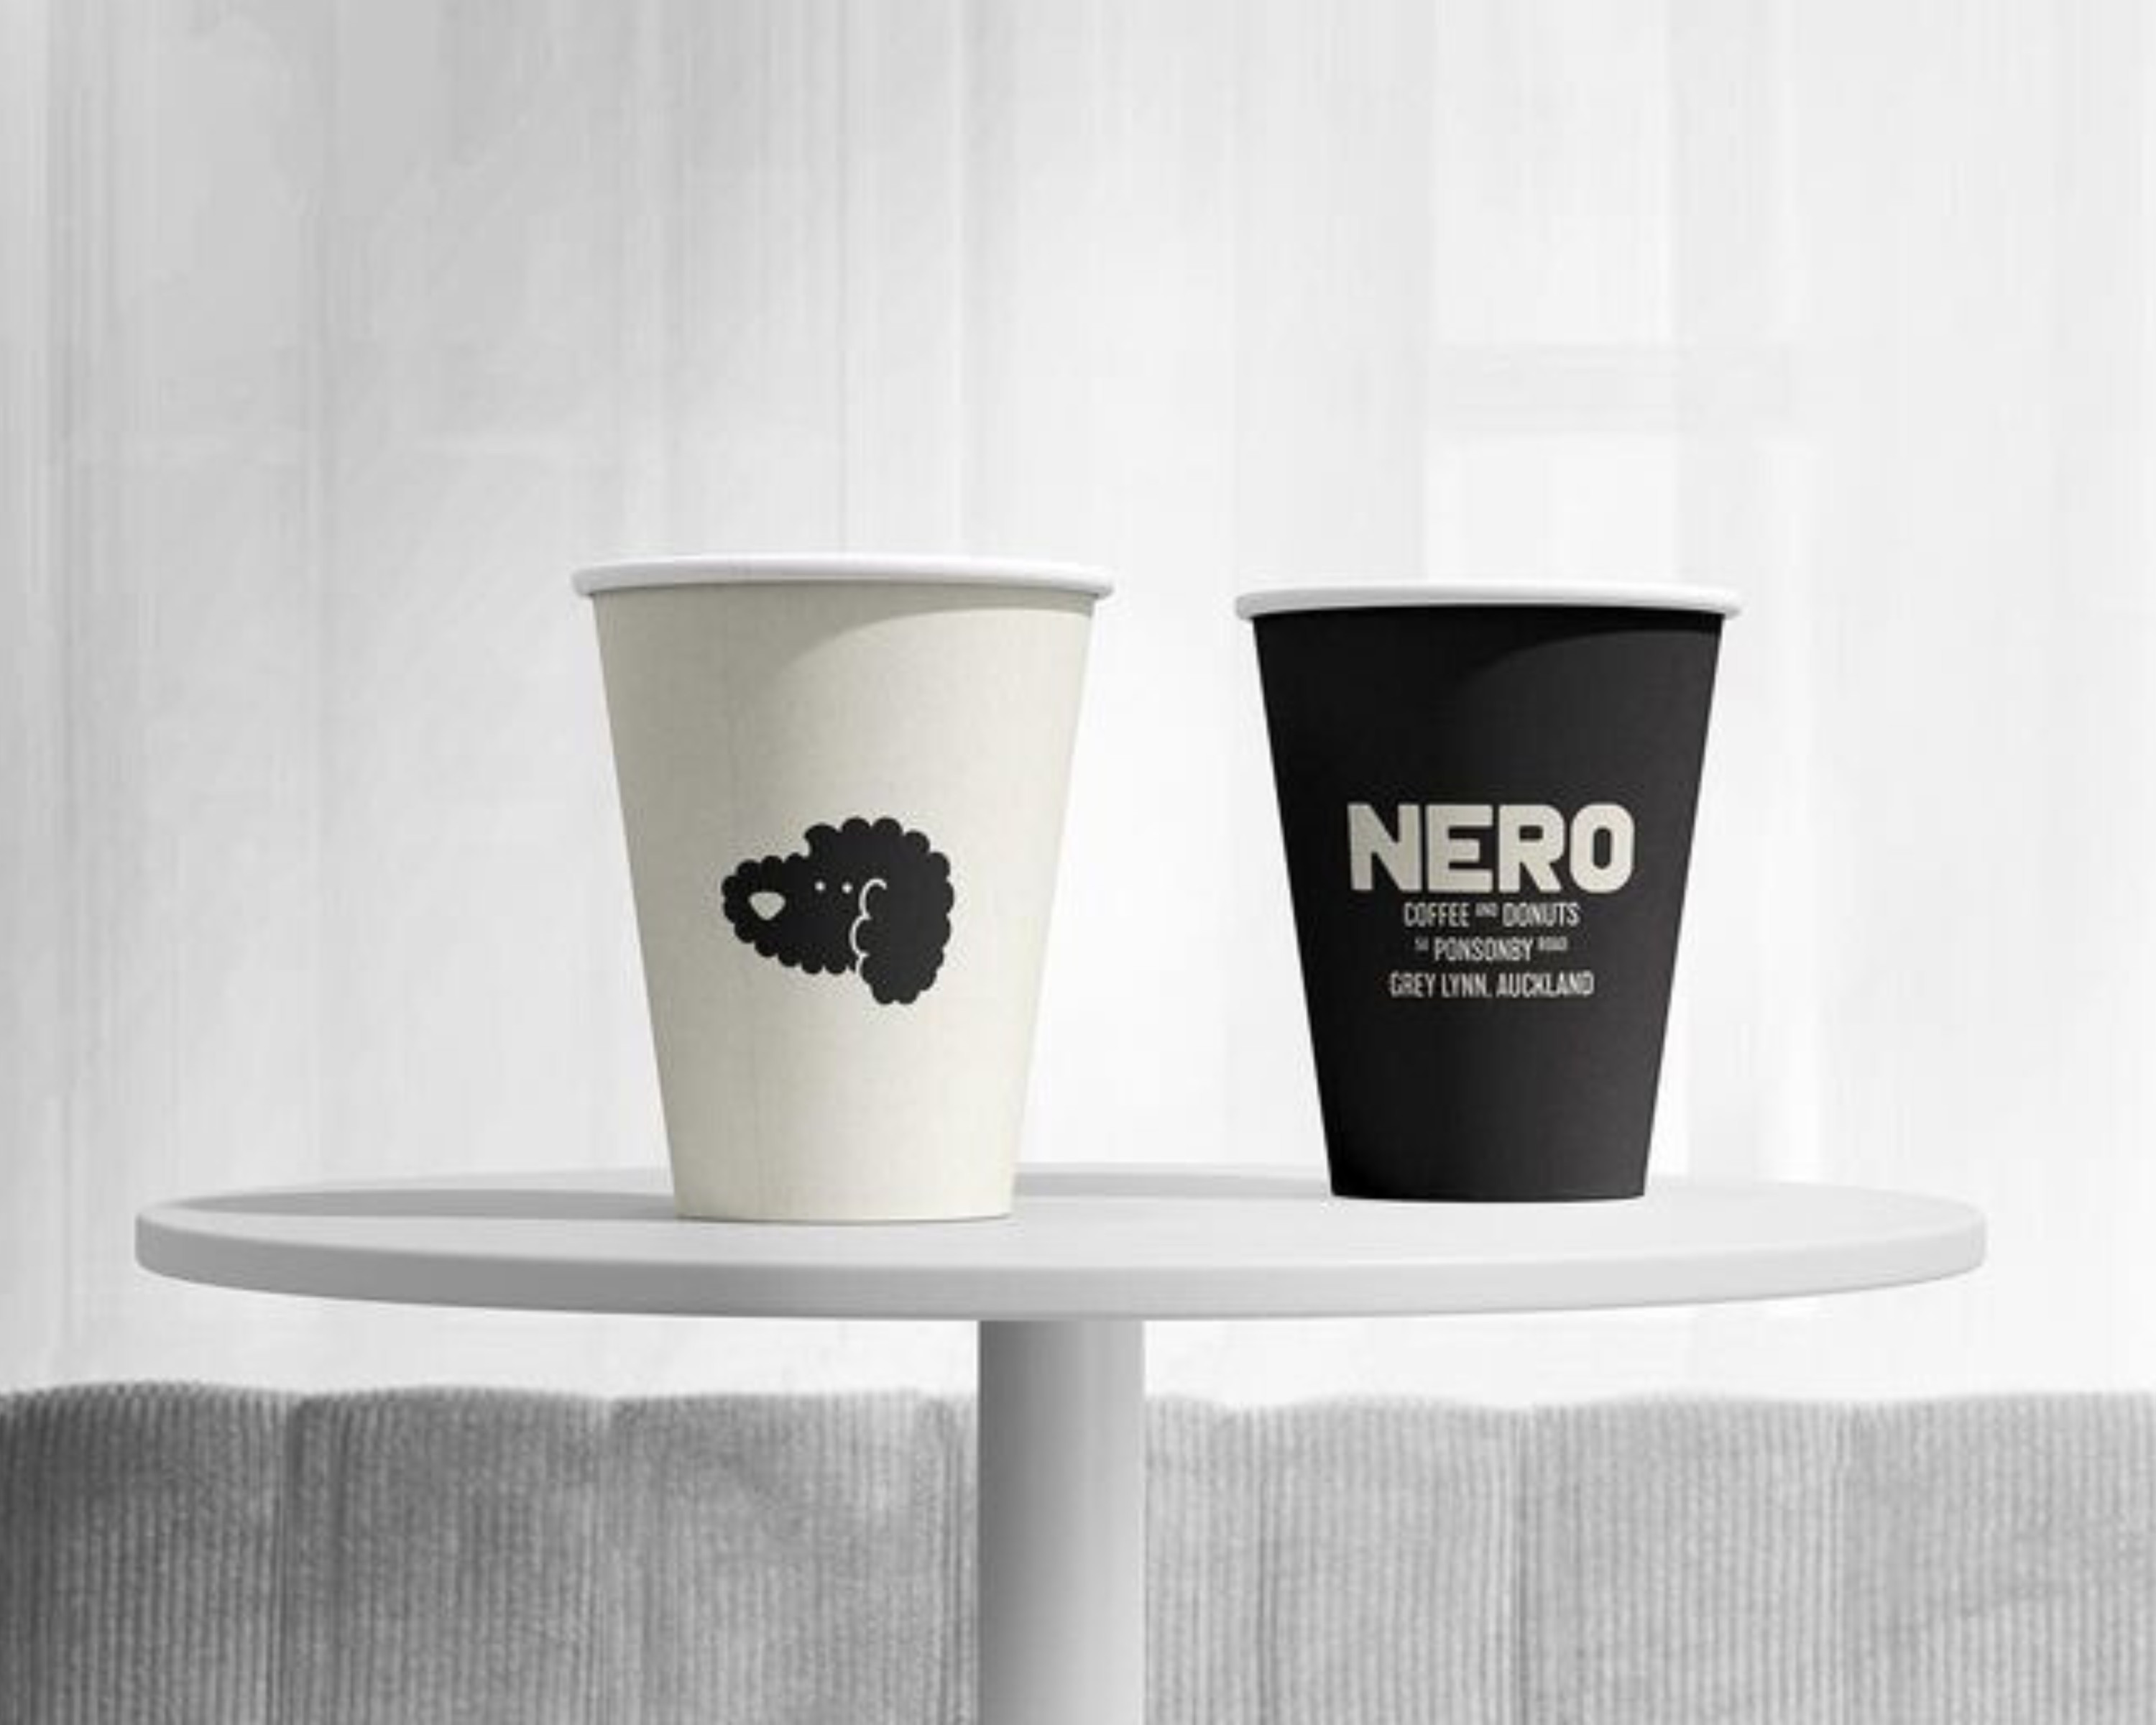 Coffee from new Ponsonby Road cafe Nero